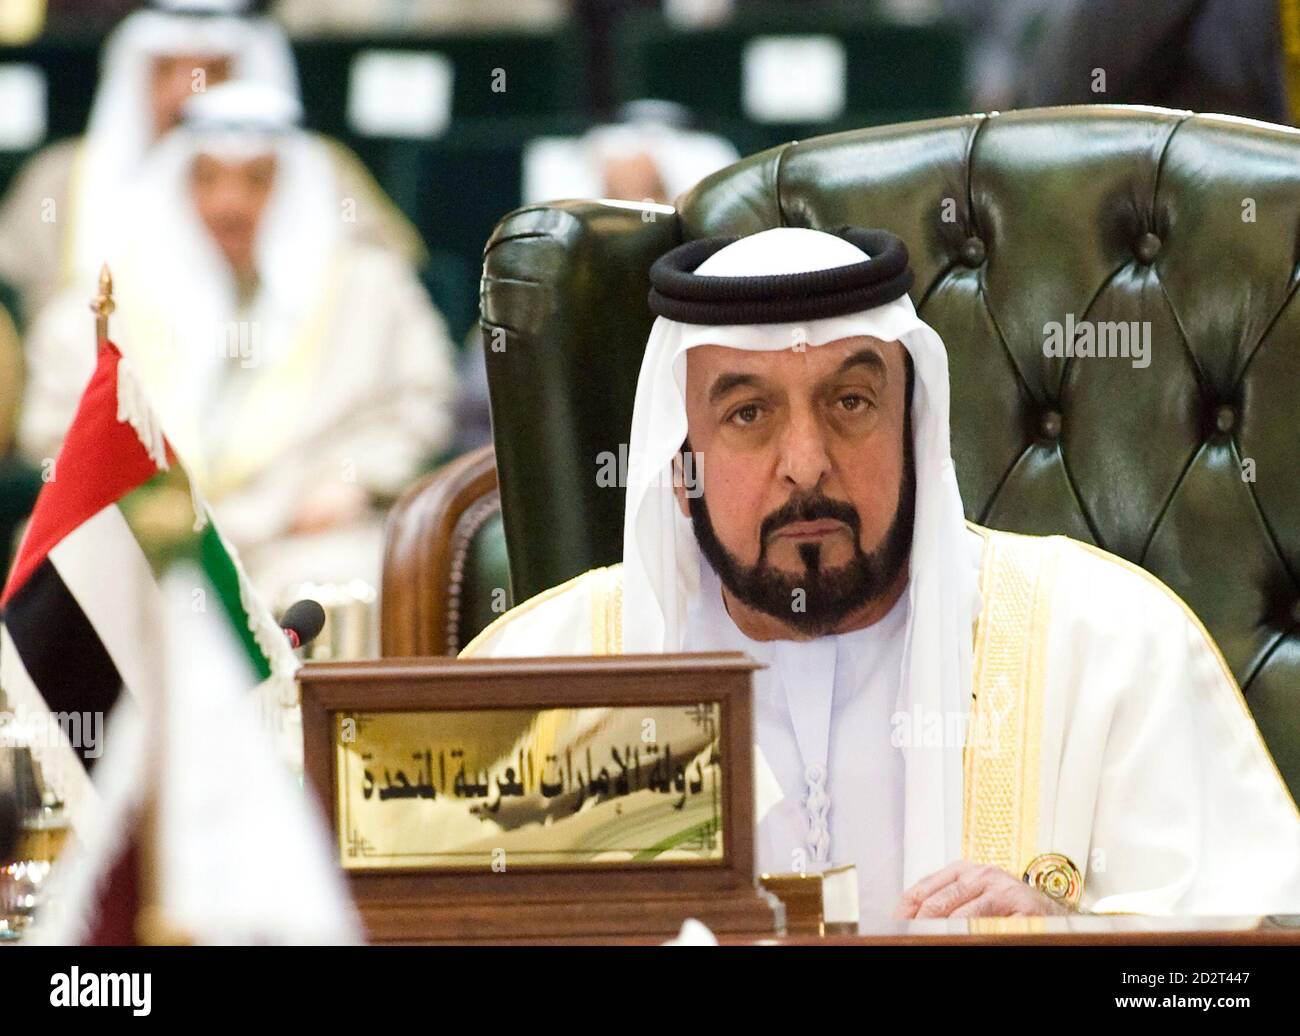 Page 3 - Zayed Bin Khalifa Al Nahyan High Resolution Stock Photography and  Images - Alamy